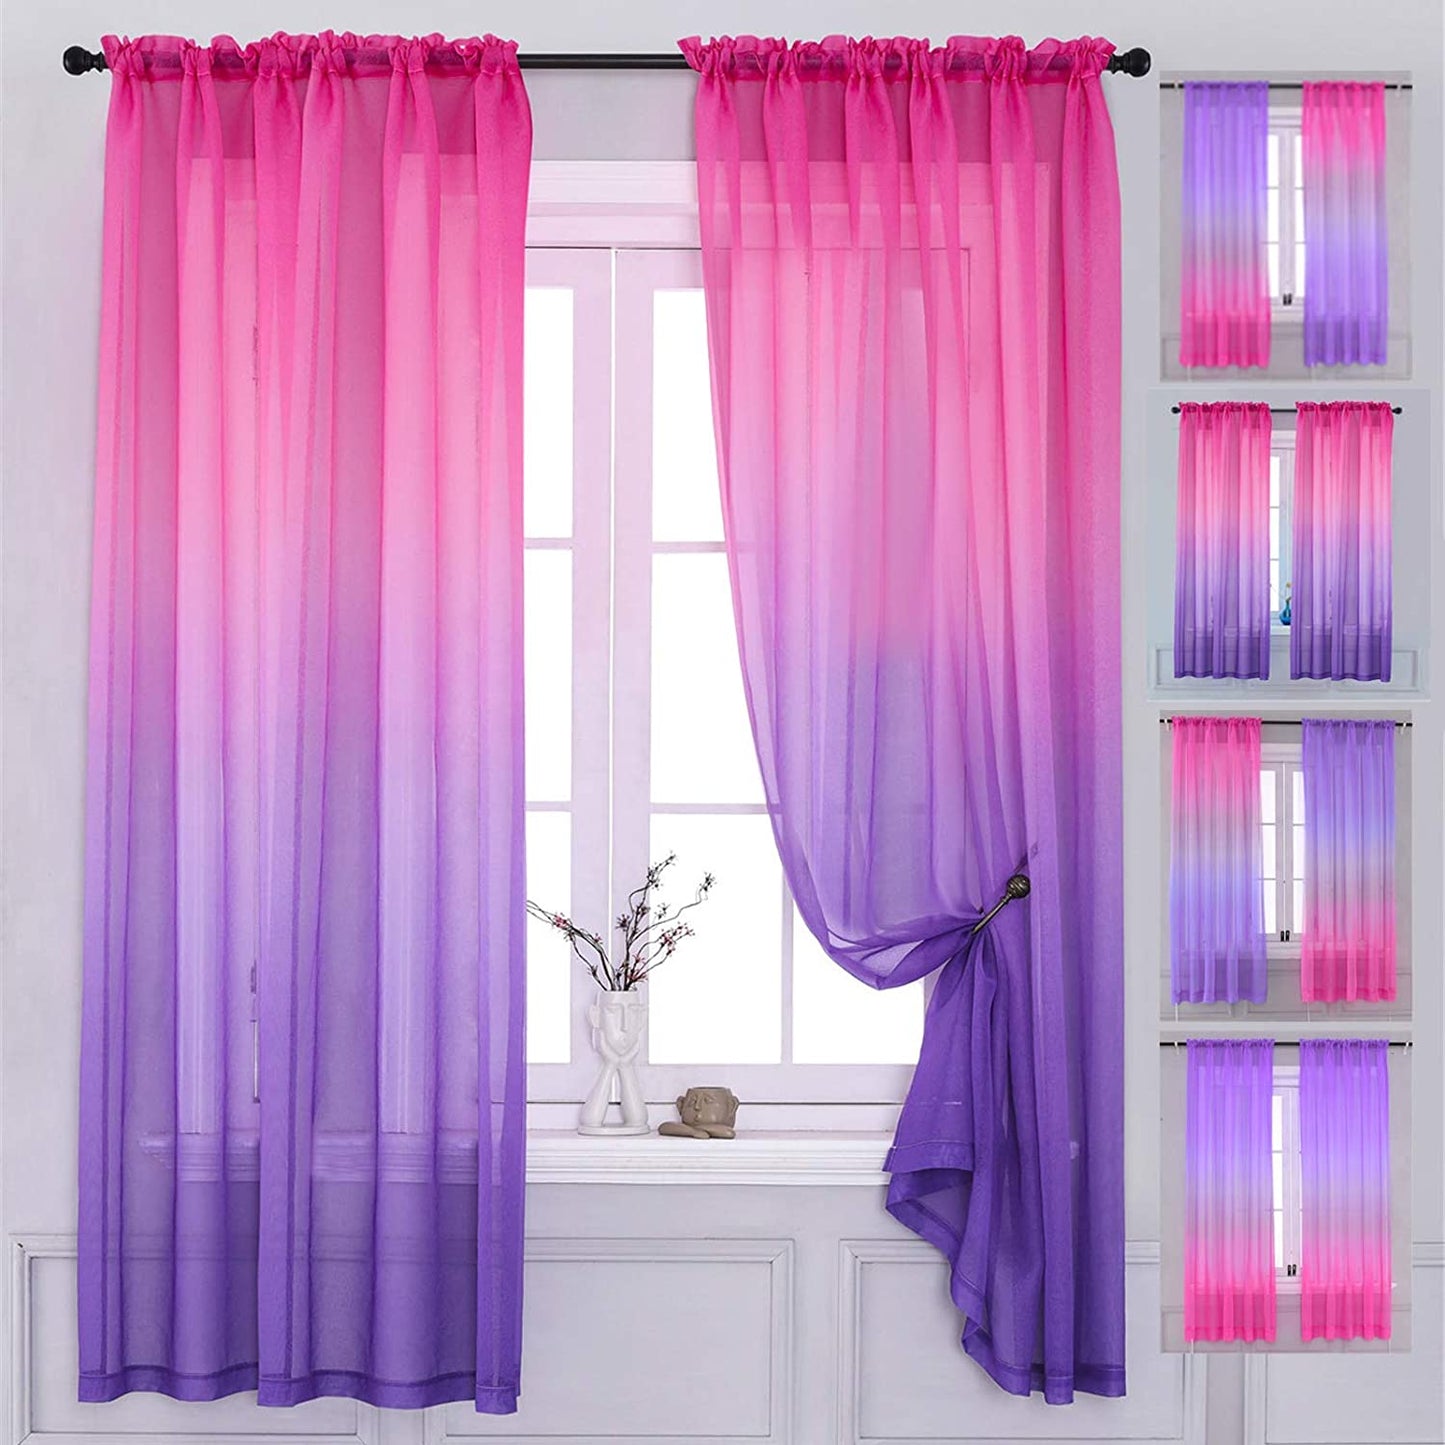 Yancorp 2 Panel Sets Semi Bedroom Curtains 63 Inch Length Sheer Rod Pocket Curtain Linen Teal Turquoise Purple Ombre Girls Living Room Mermaid Bedroom Nursery Kids Decor (Turquoise Purple, 40"X63")  Yancorp Pink Purple 52"X84" 